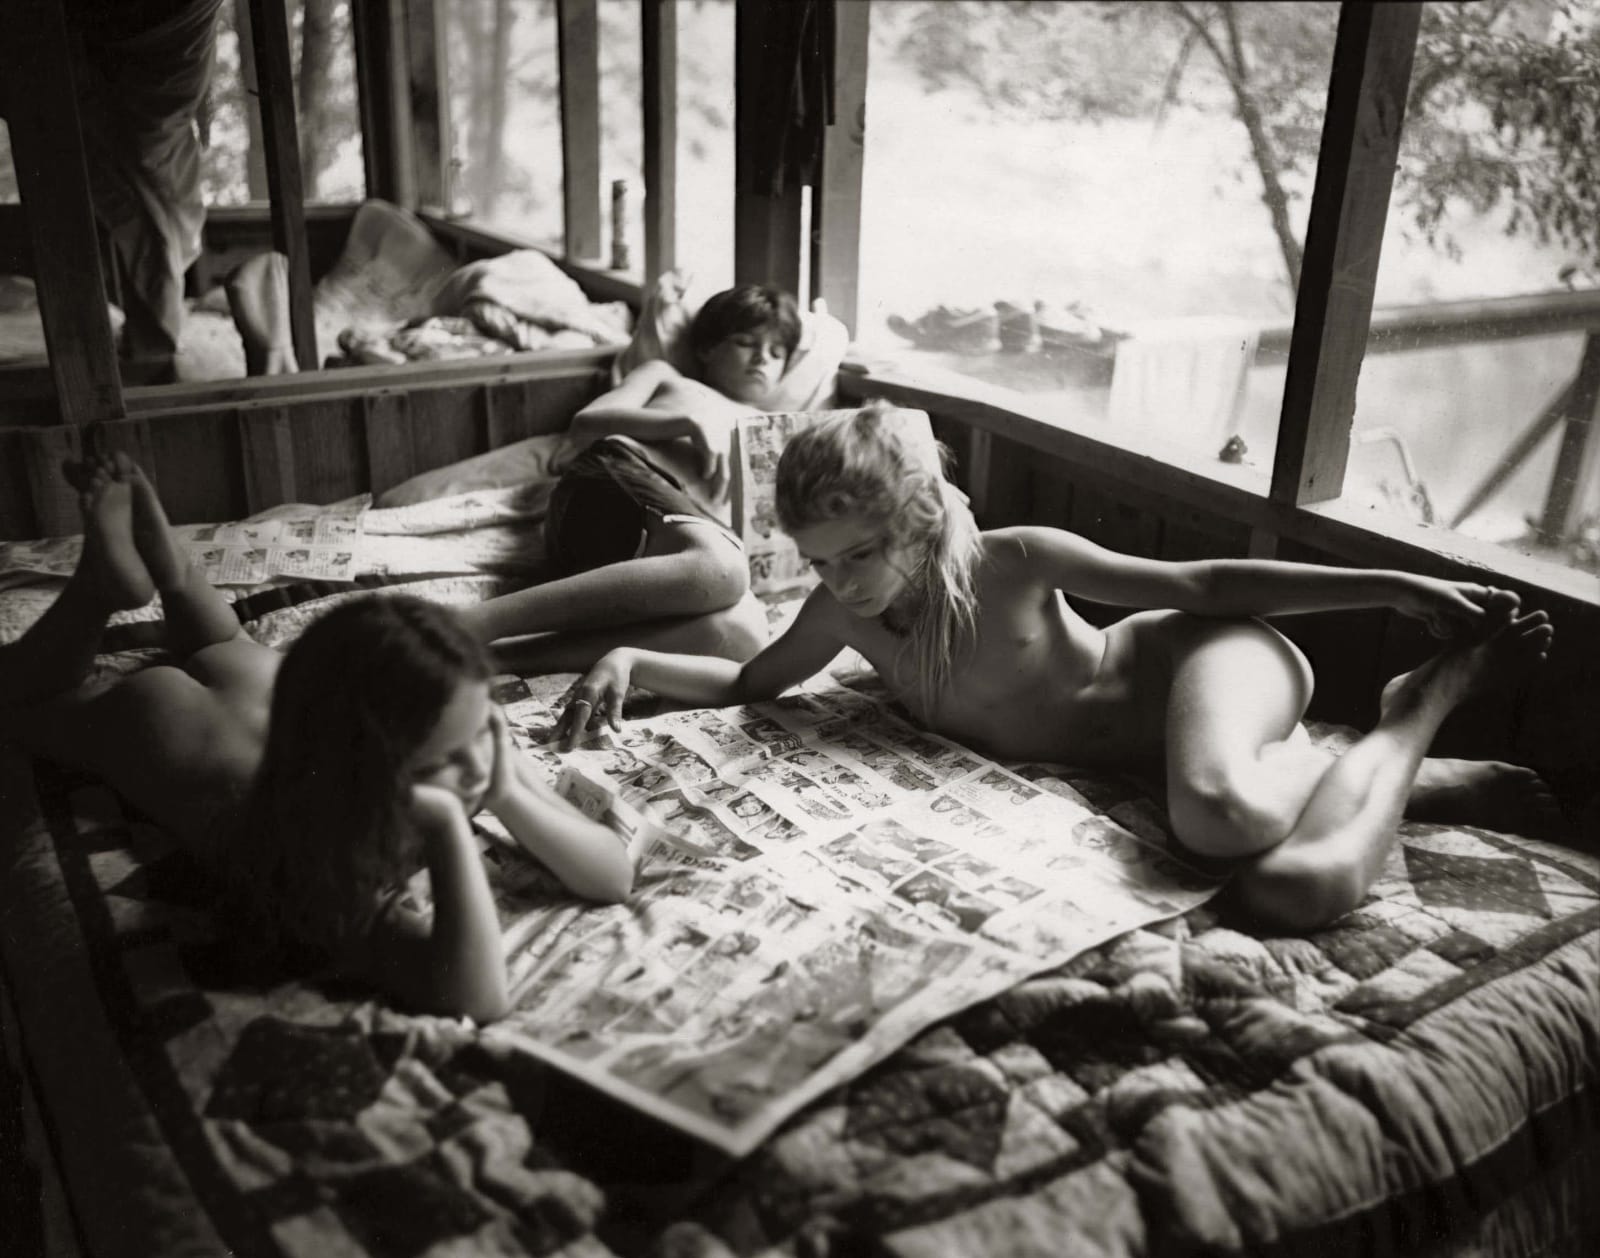 Emmett, Jessie and Virginia reading the Sunday funnies, from the Immediate Family series by Sally Mann